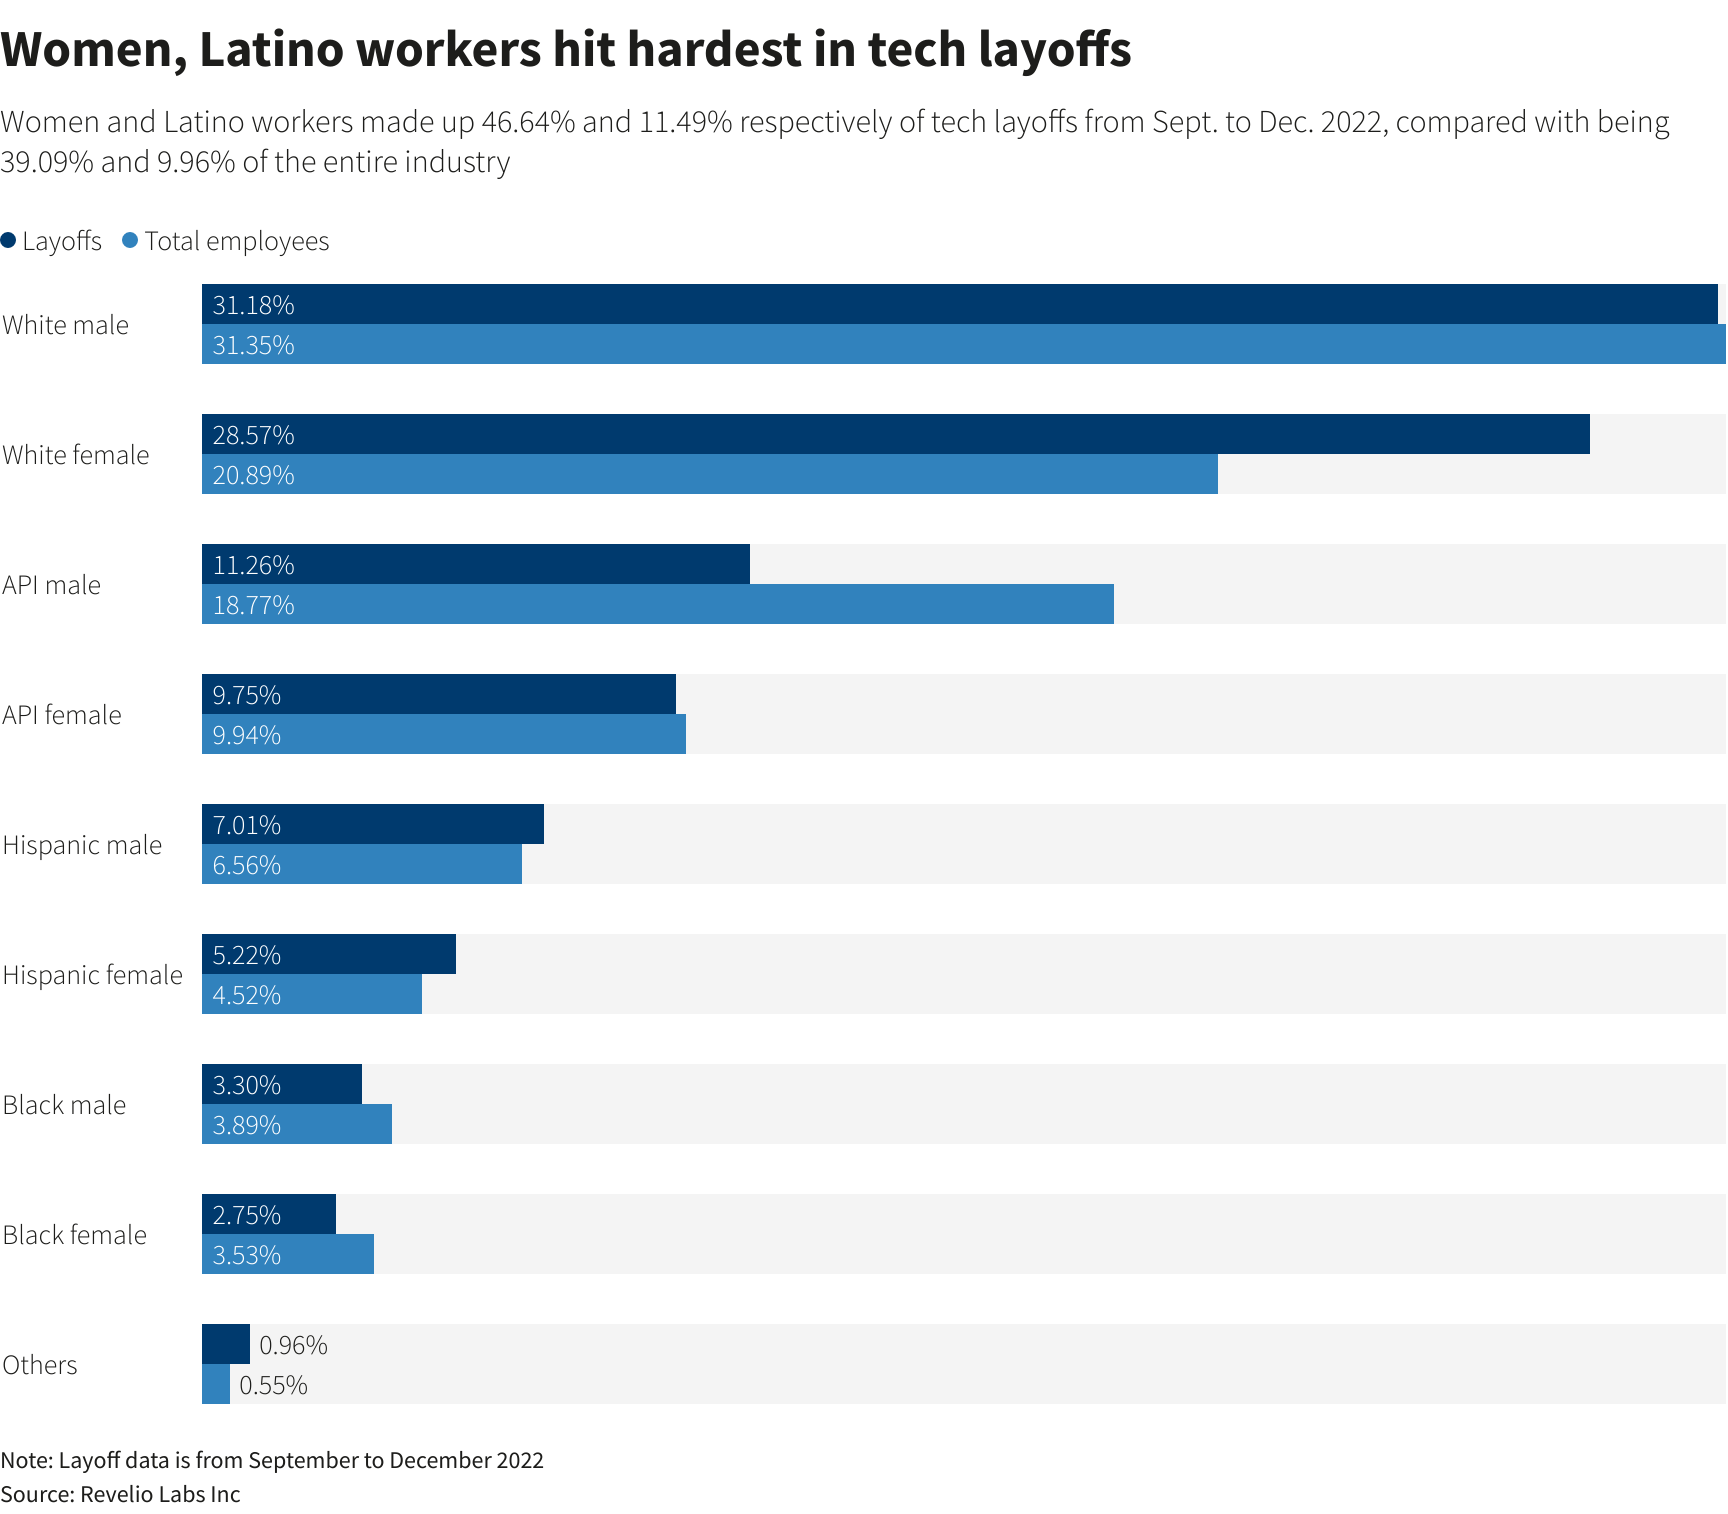 Tech layoffs Big tech layoffs may further disrupt equity and diversity